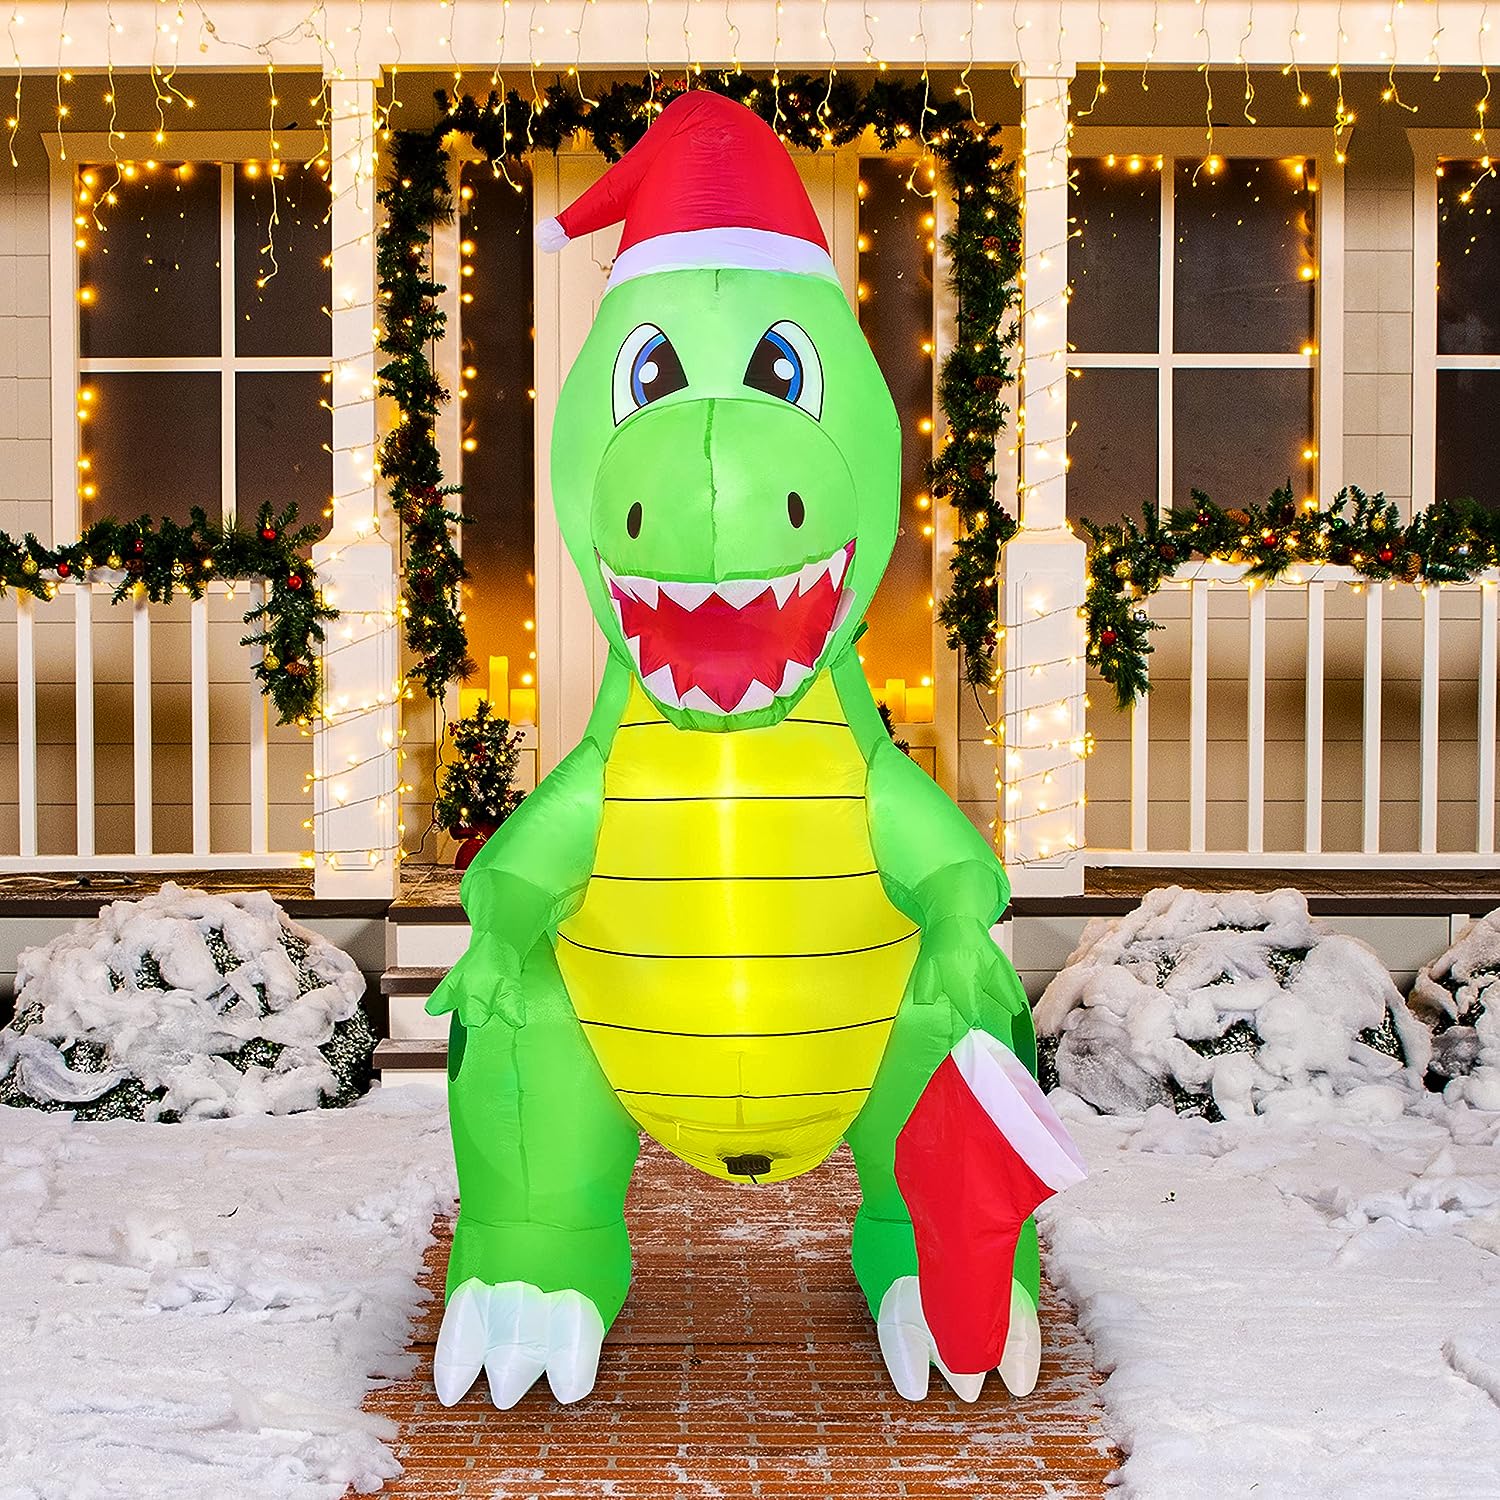 6 FT Christmas Inflatable Dinosaur with Build-in LEDs